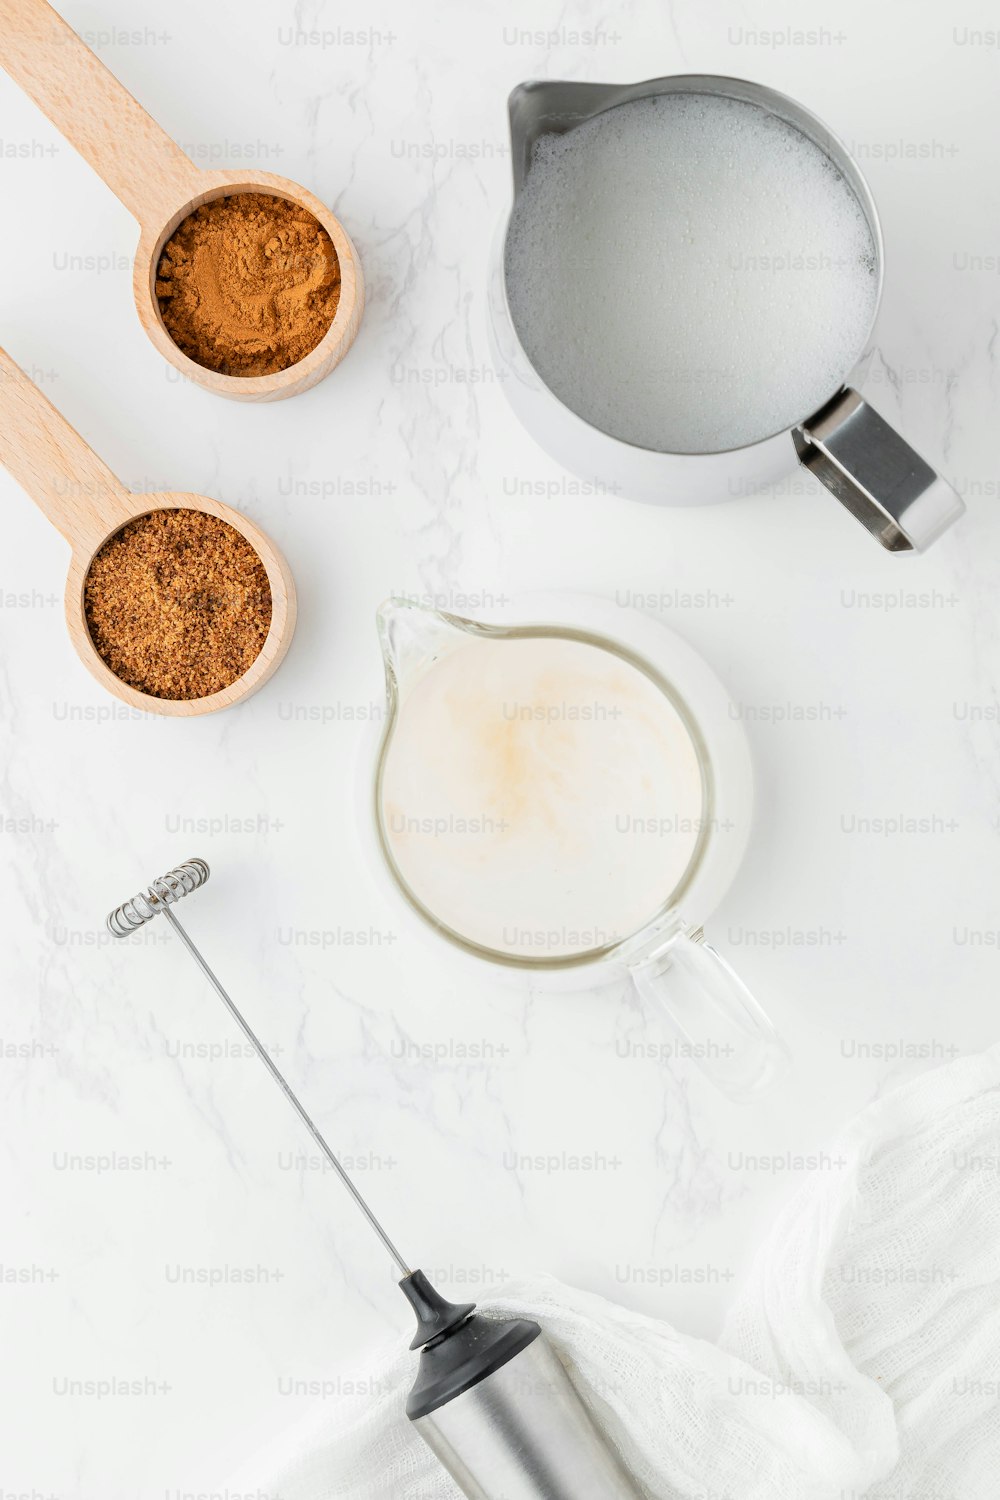 a whisk, a measuring cup, and a measuring spoon on a white